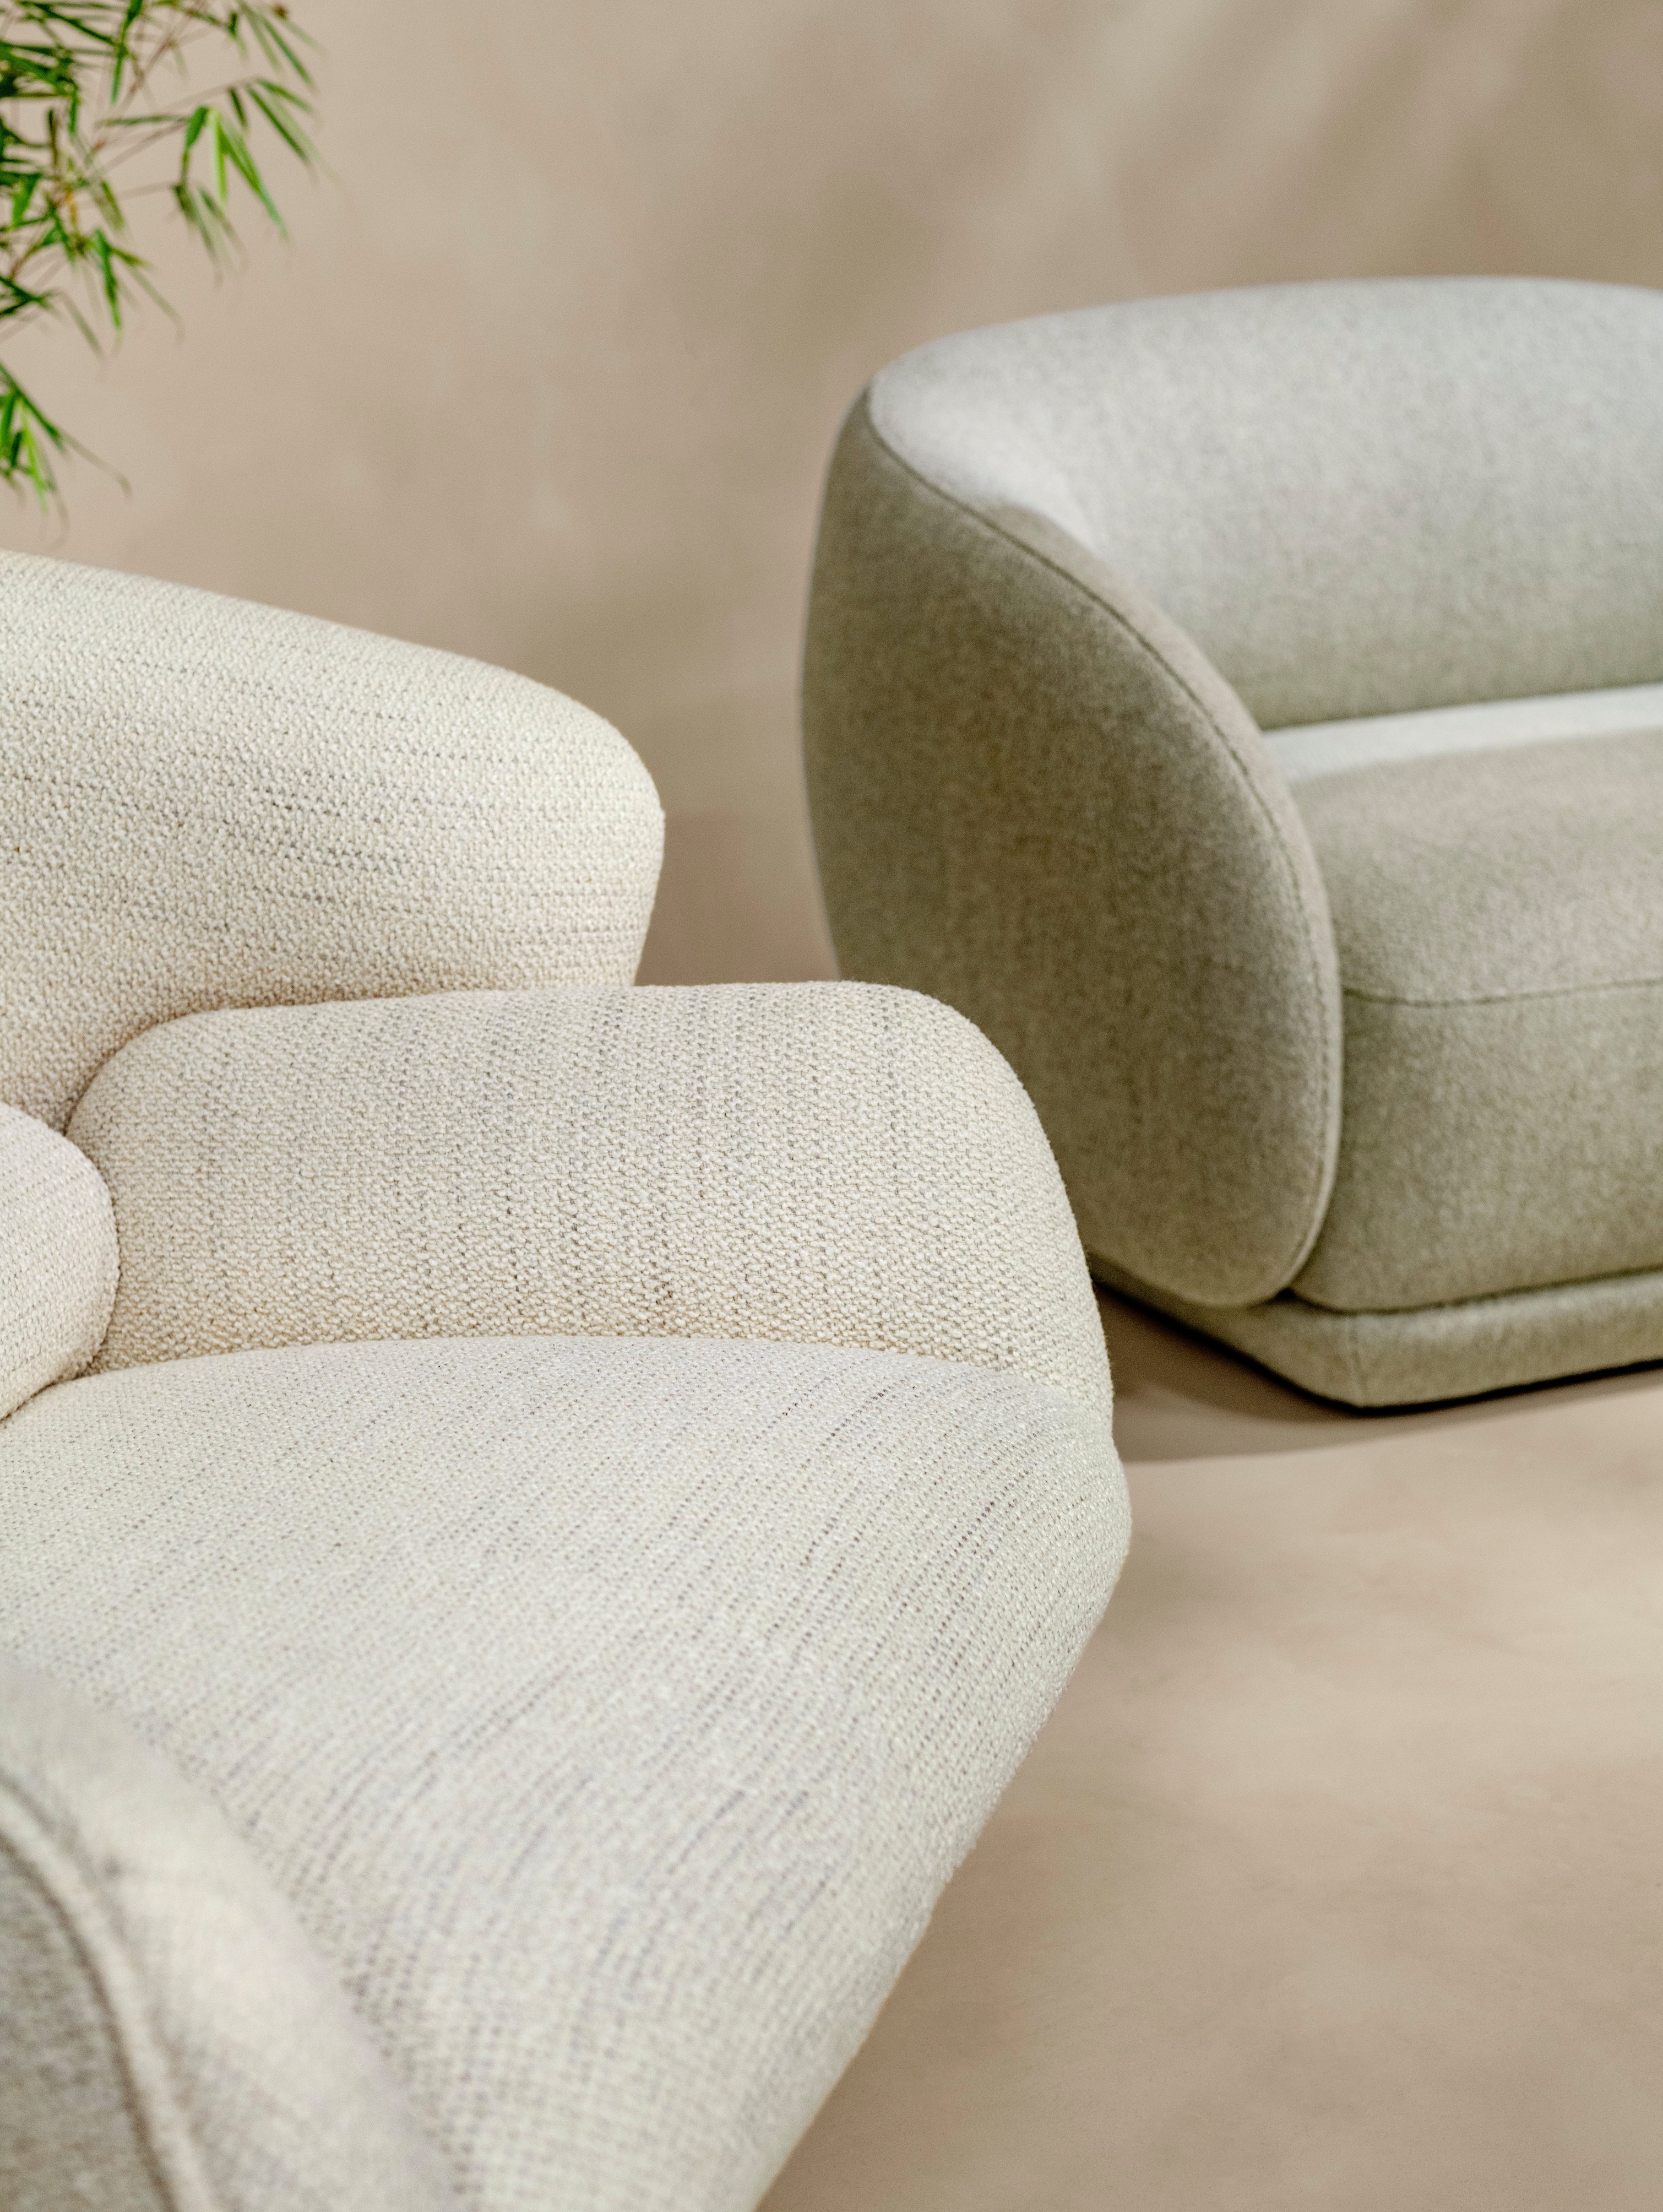 The Fusion chair in white Lazio fabric styled with the Bolzano chaise lounge in light green Lazio fabric.